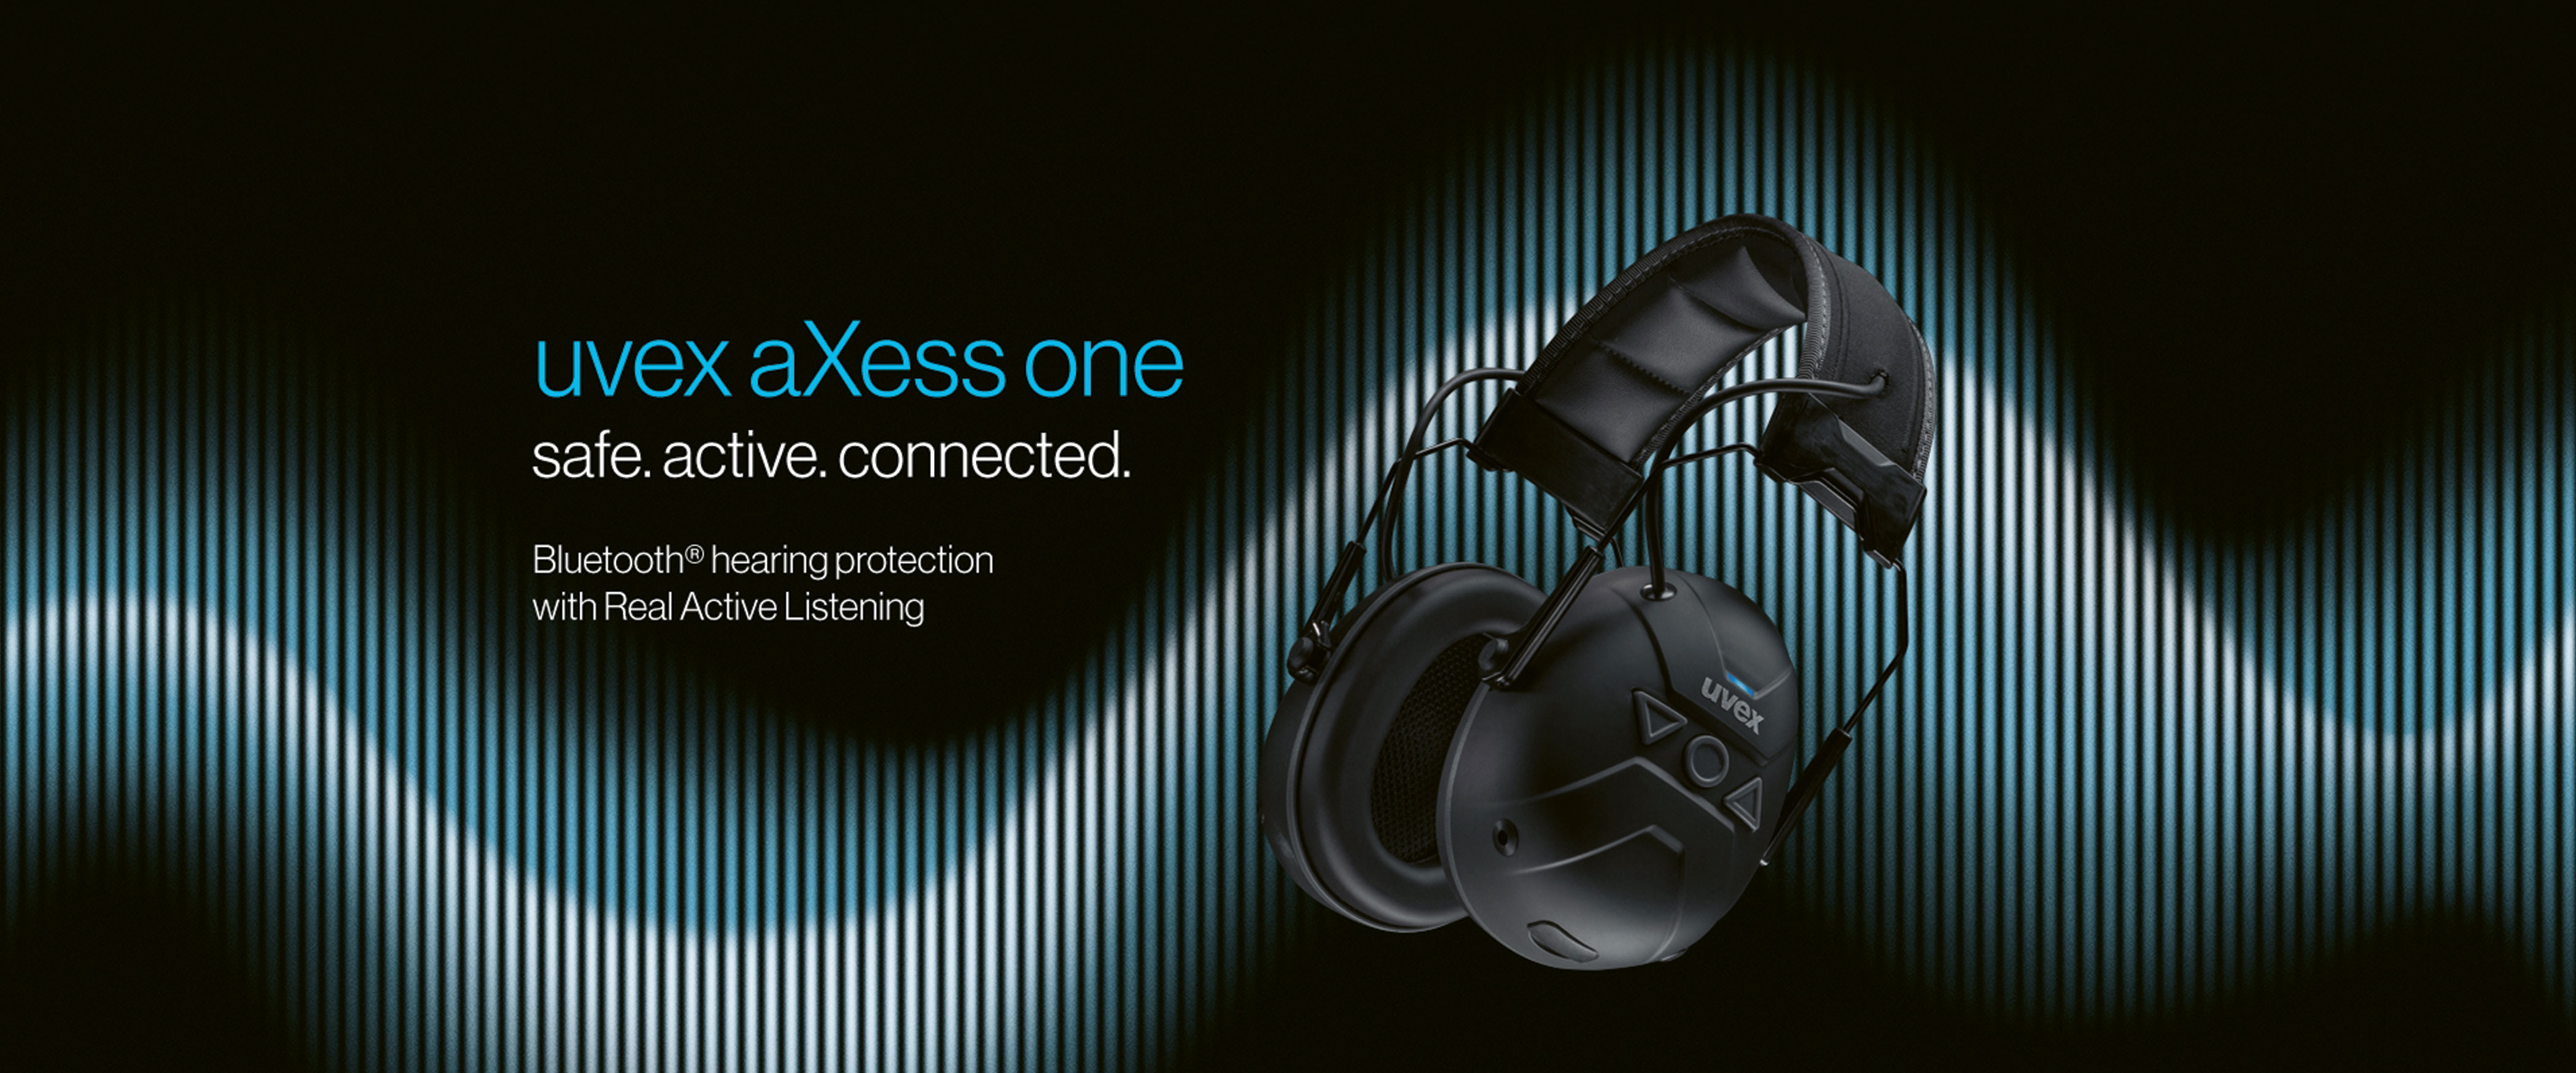 uvex-aXess-one-hearing-protection-with-bluetooth